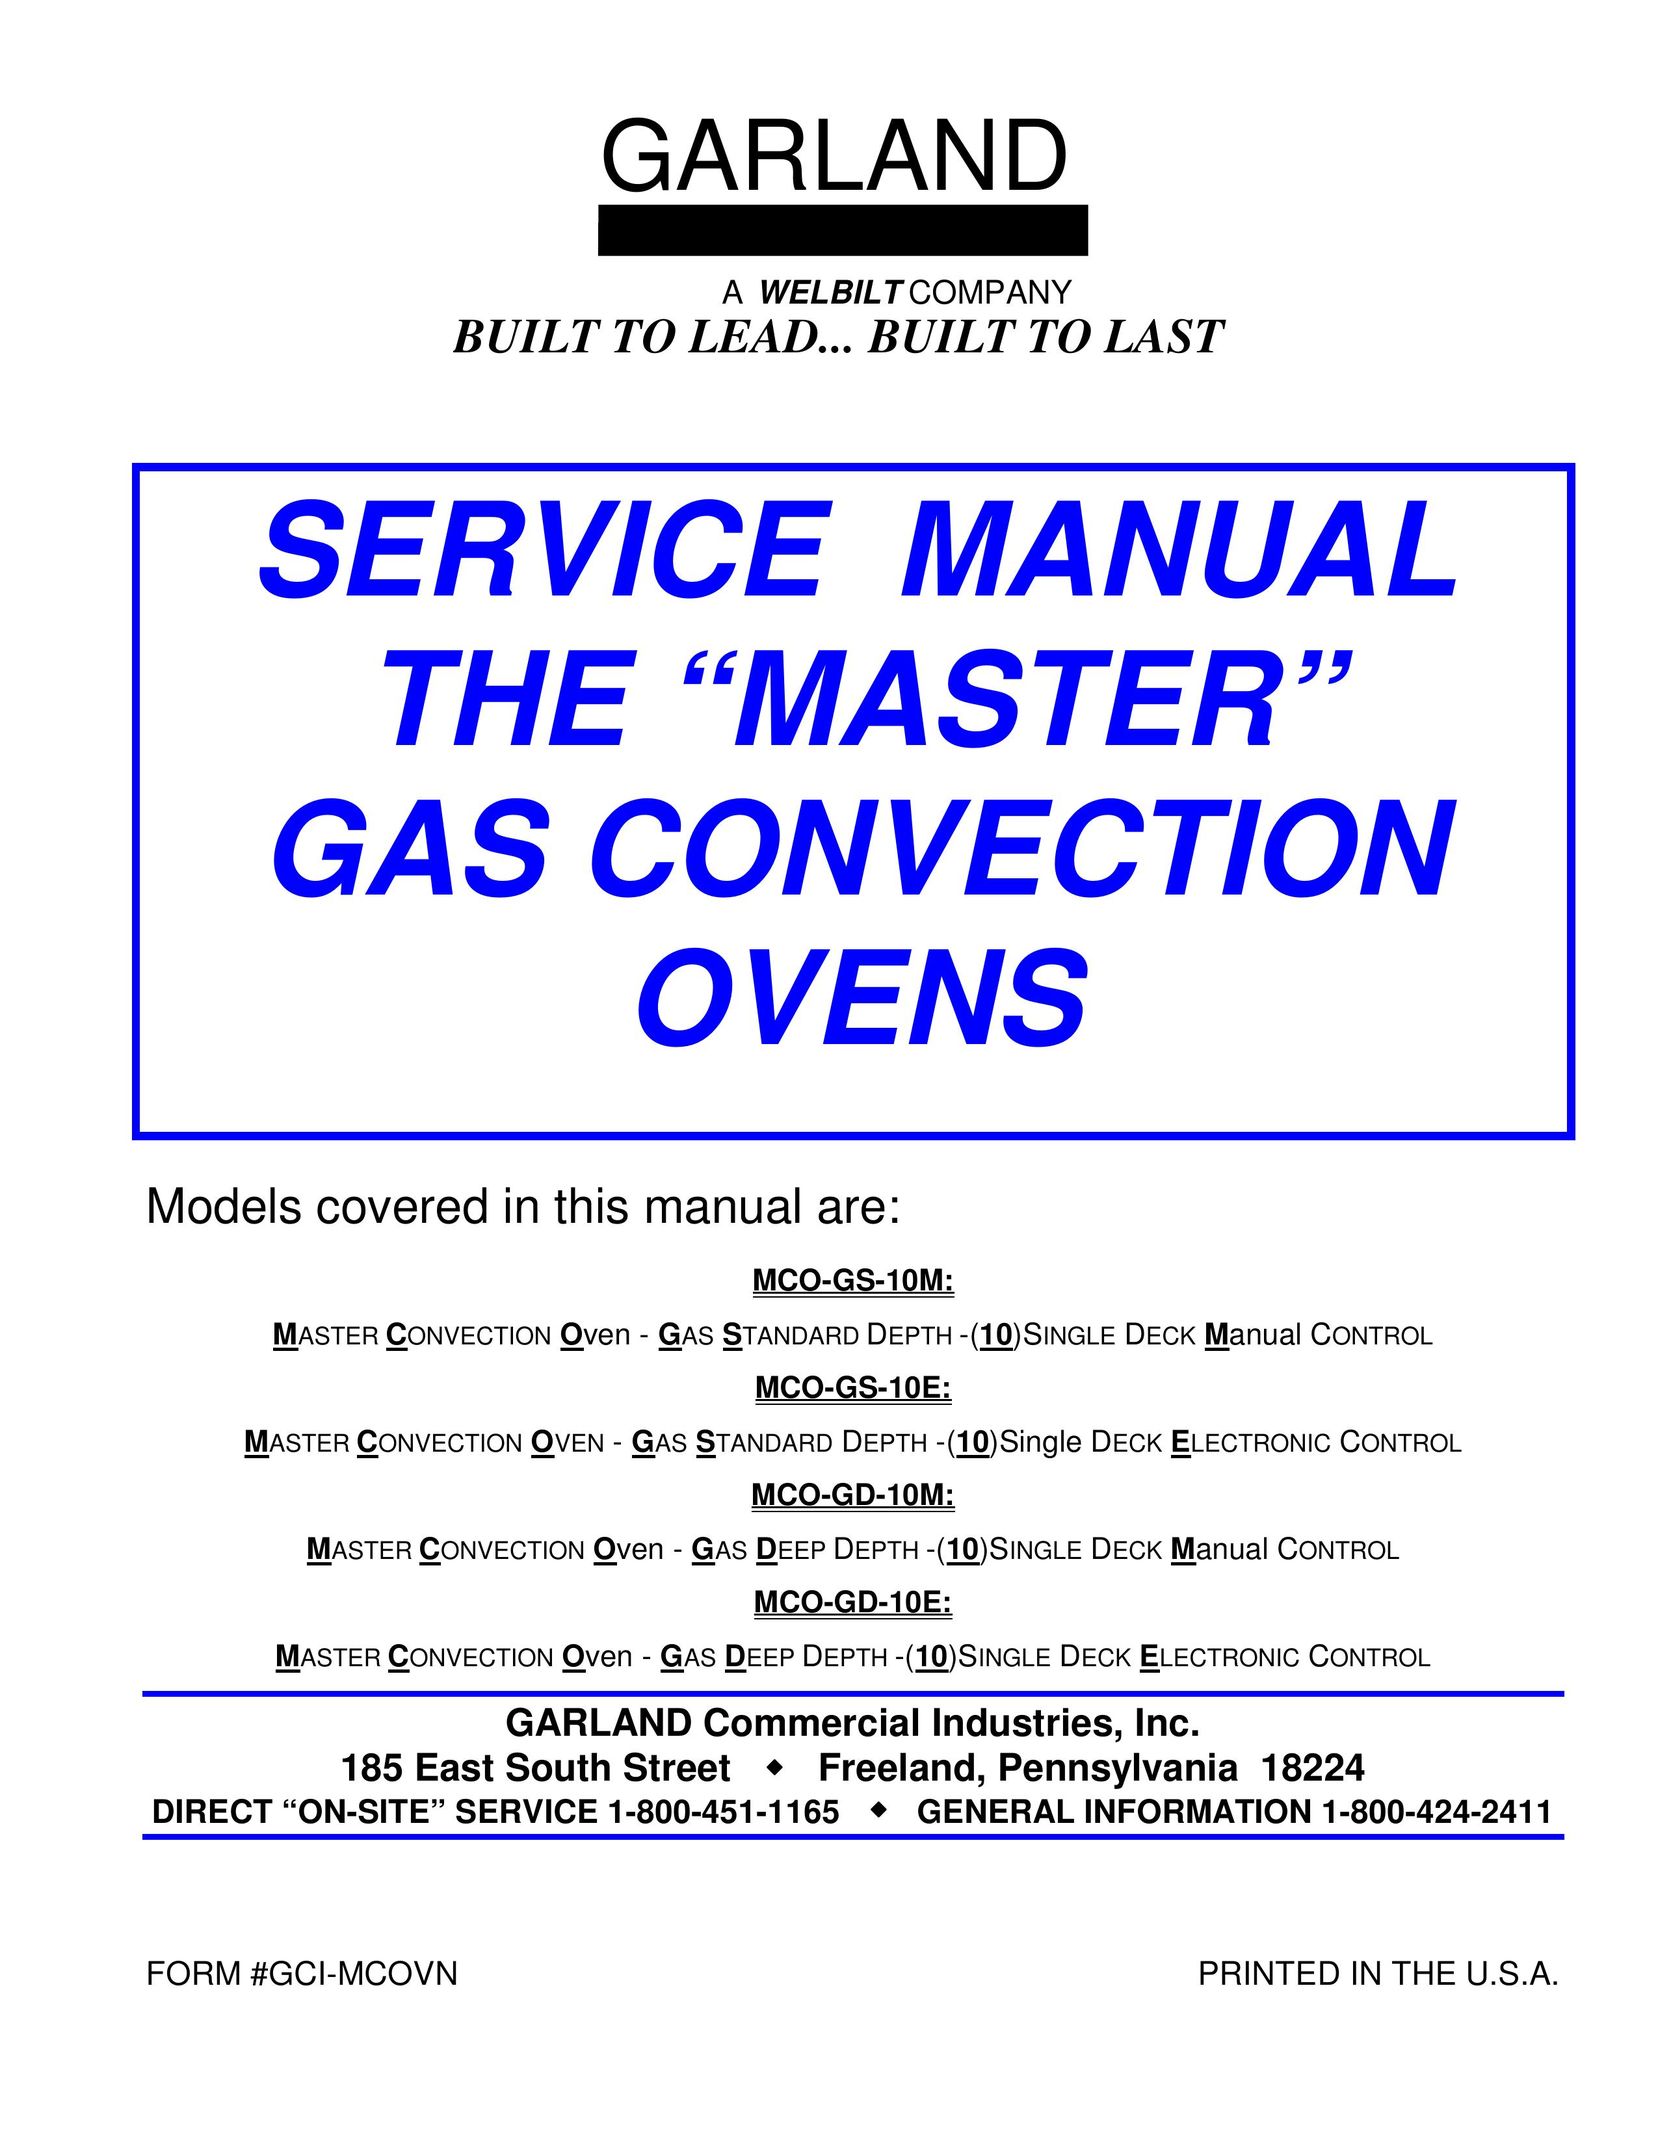 Garland MCO-GS-10M Convection Oven User Manual